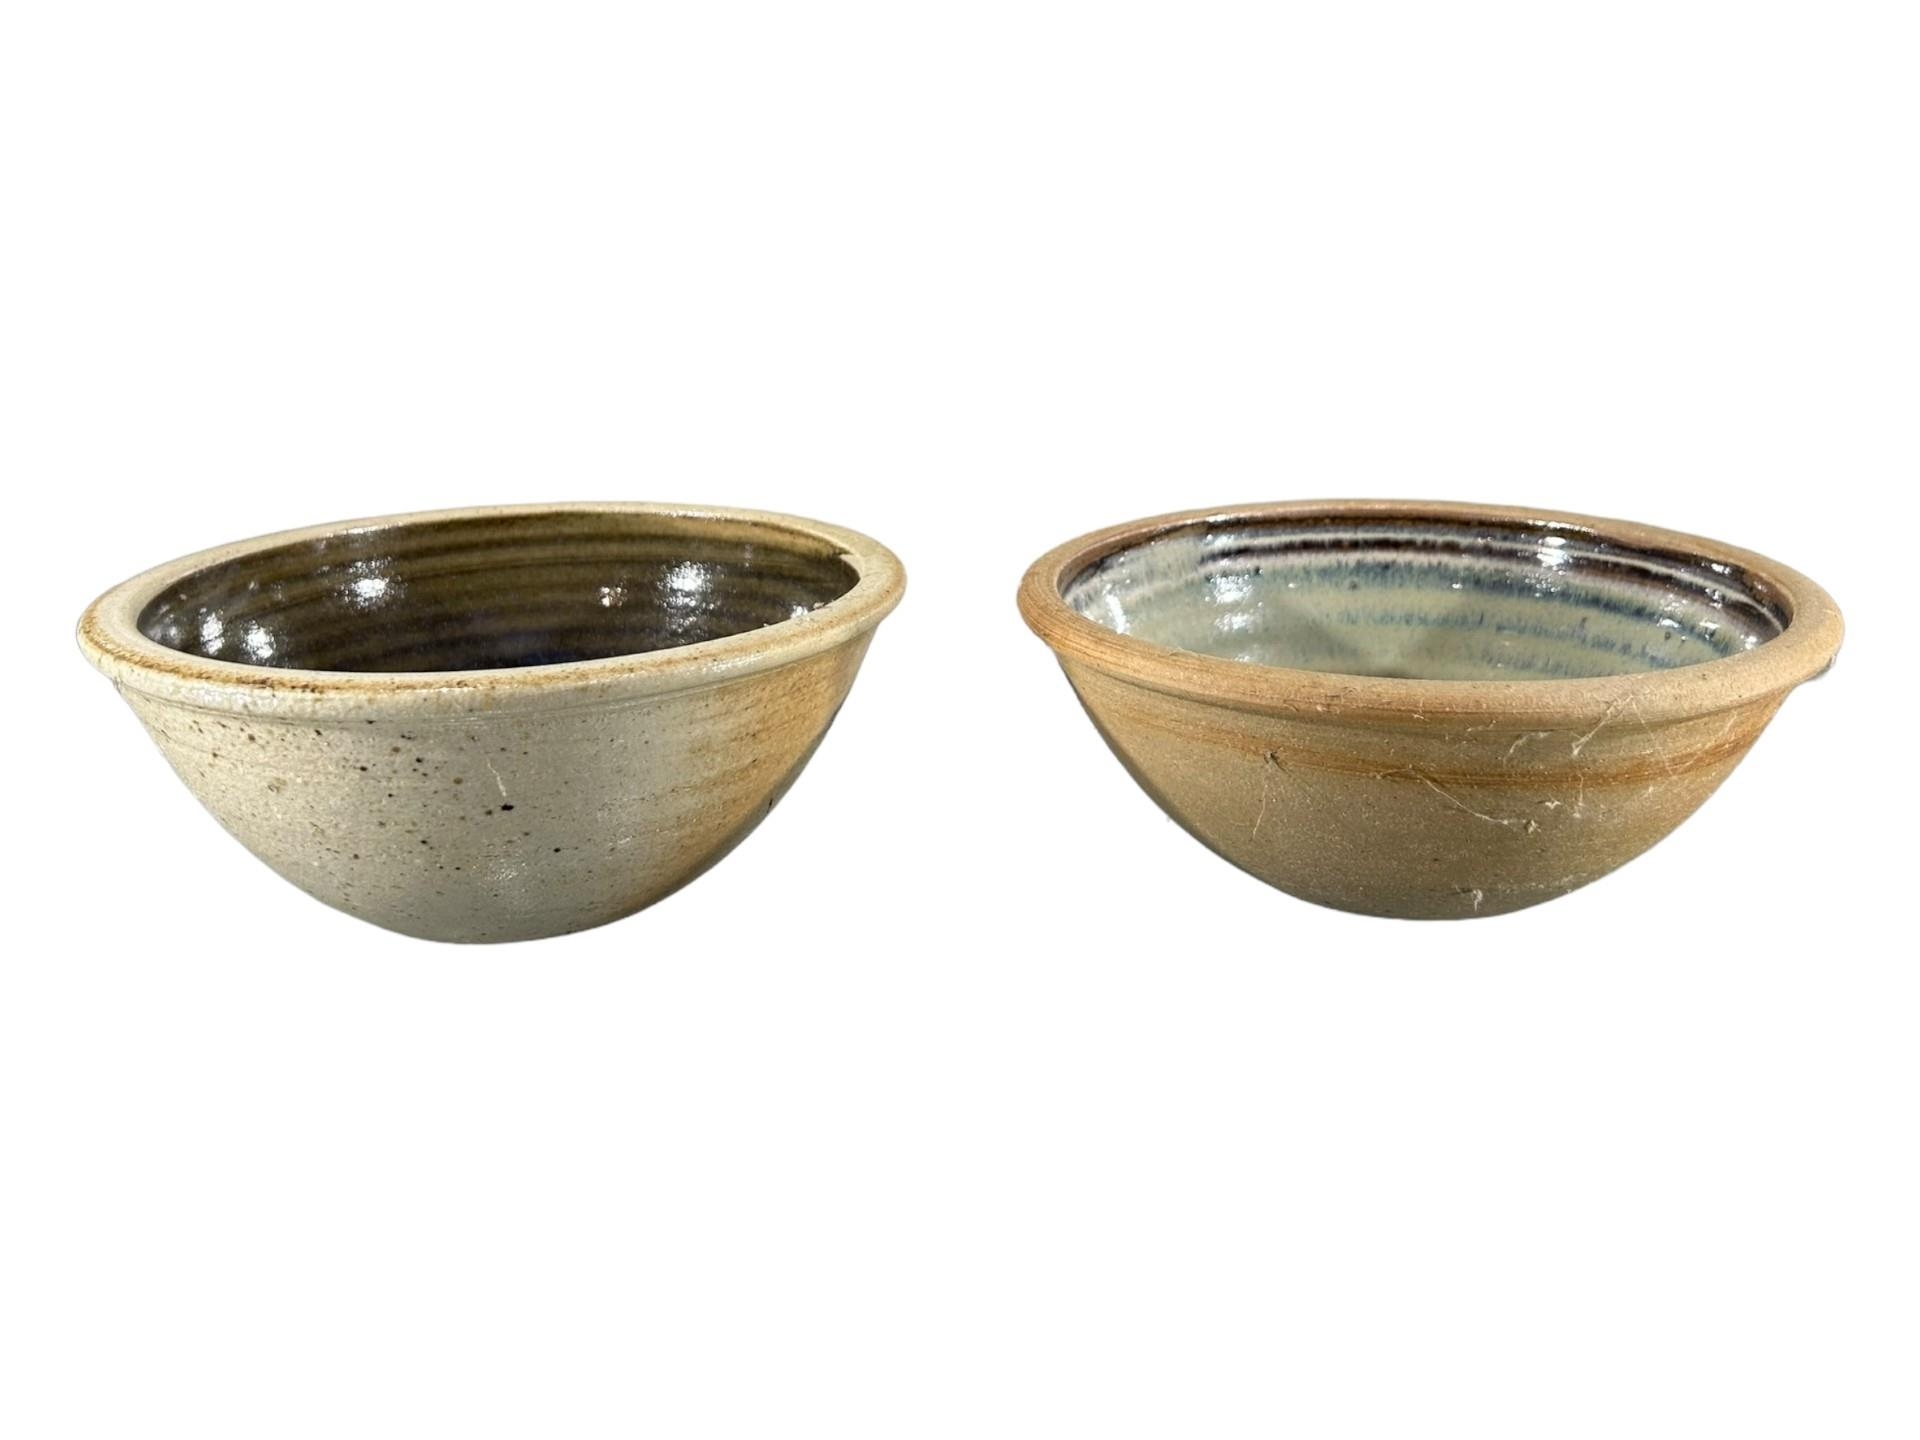 A COLLECTION OF FIVE CERAMICS FESTIVAL STUDIO POTTERY STONEWARE BOWLS, DATED 2001, TWO 2003, 2005 - Image 5 of 7